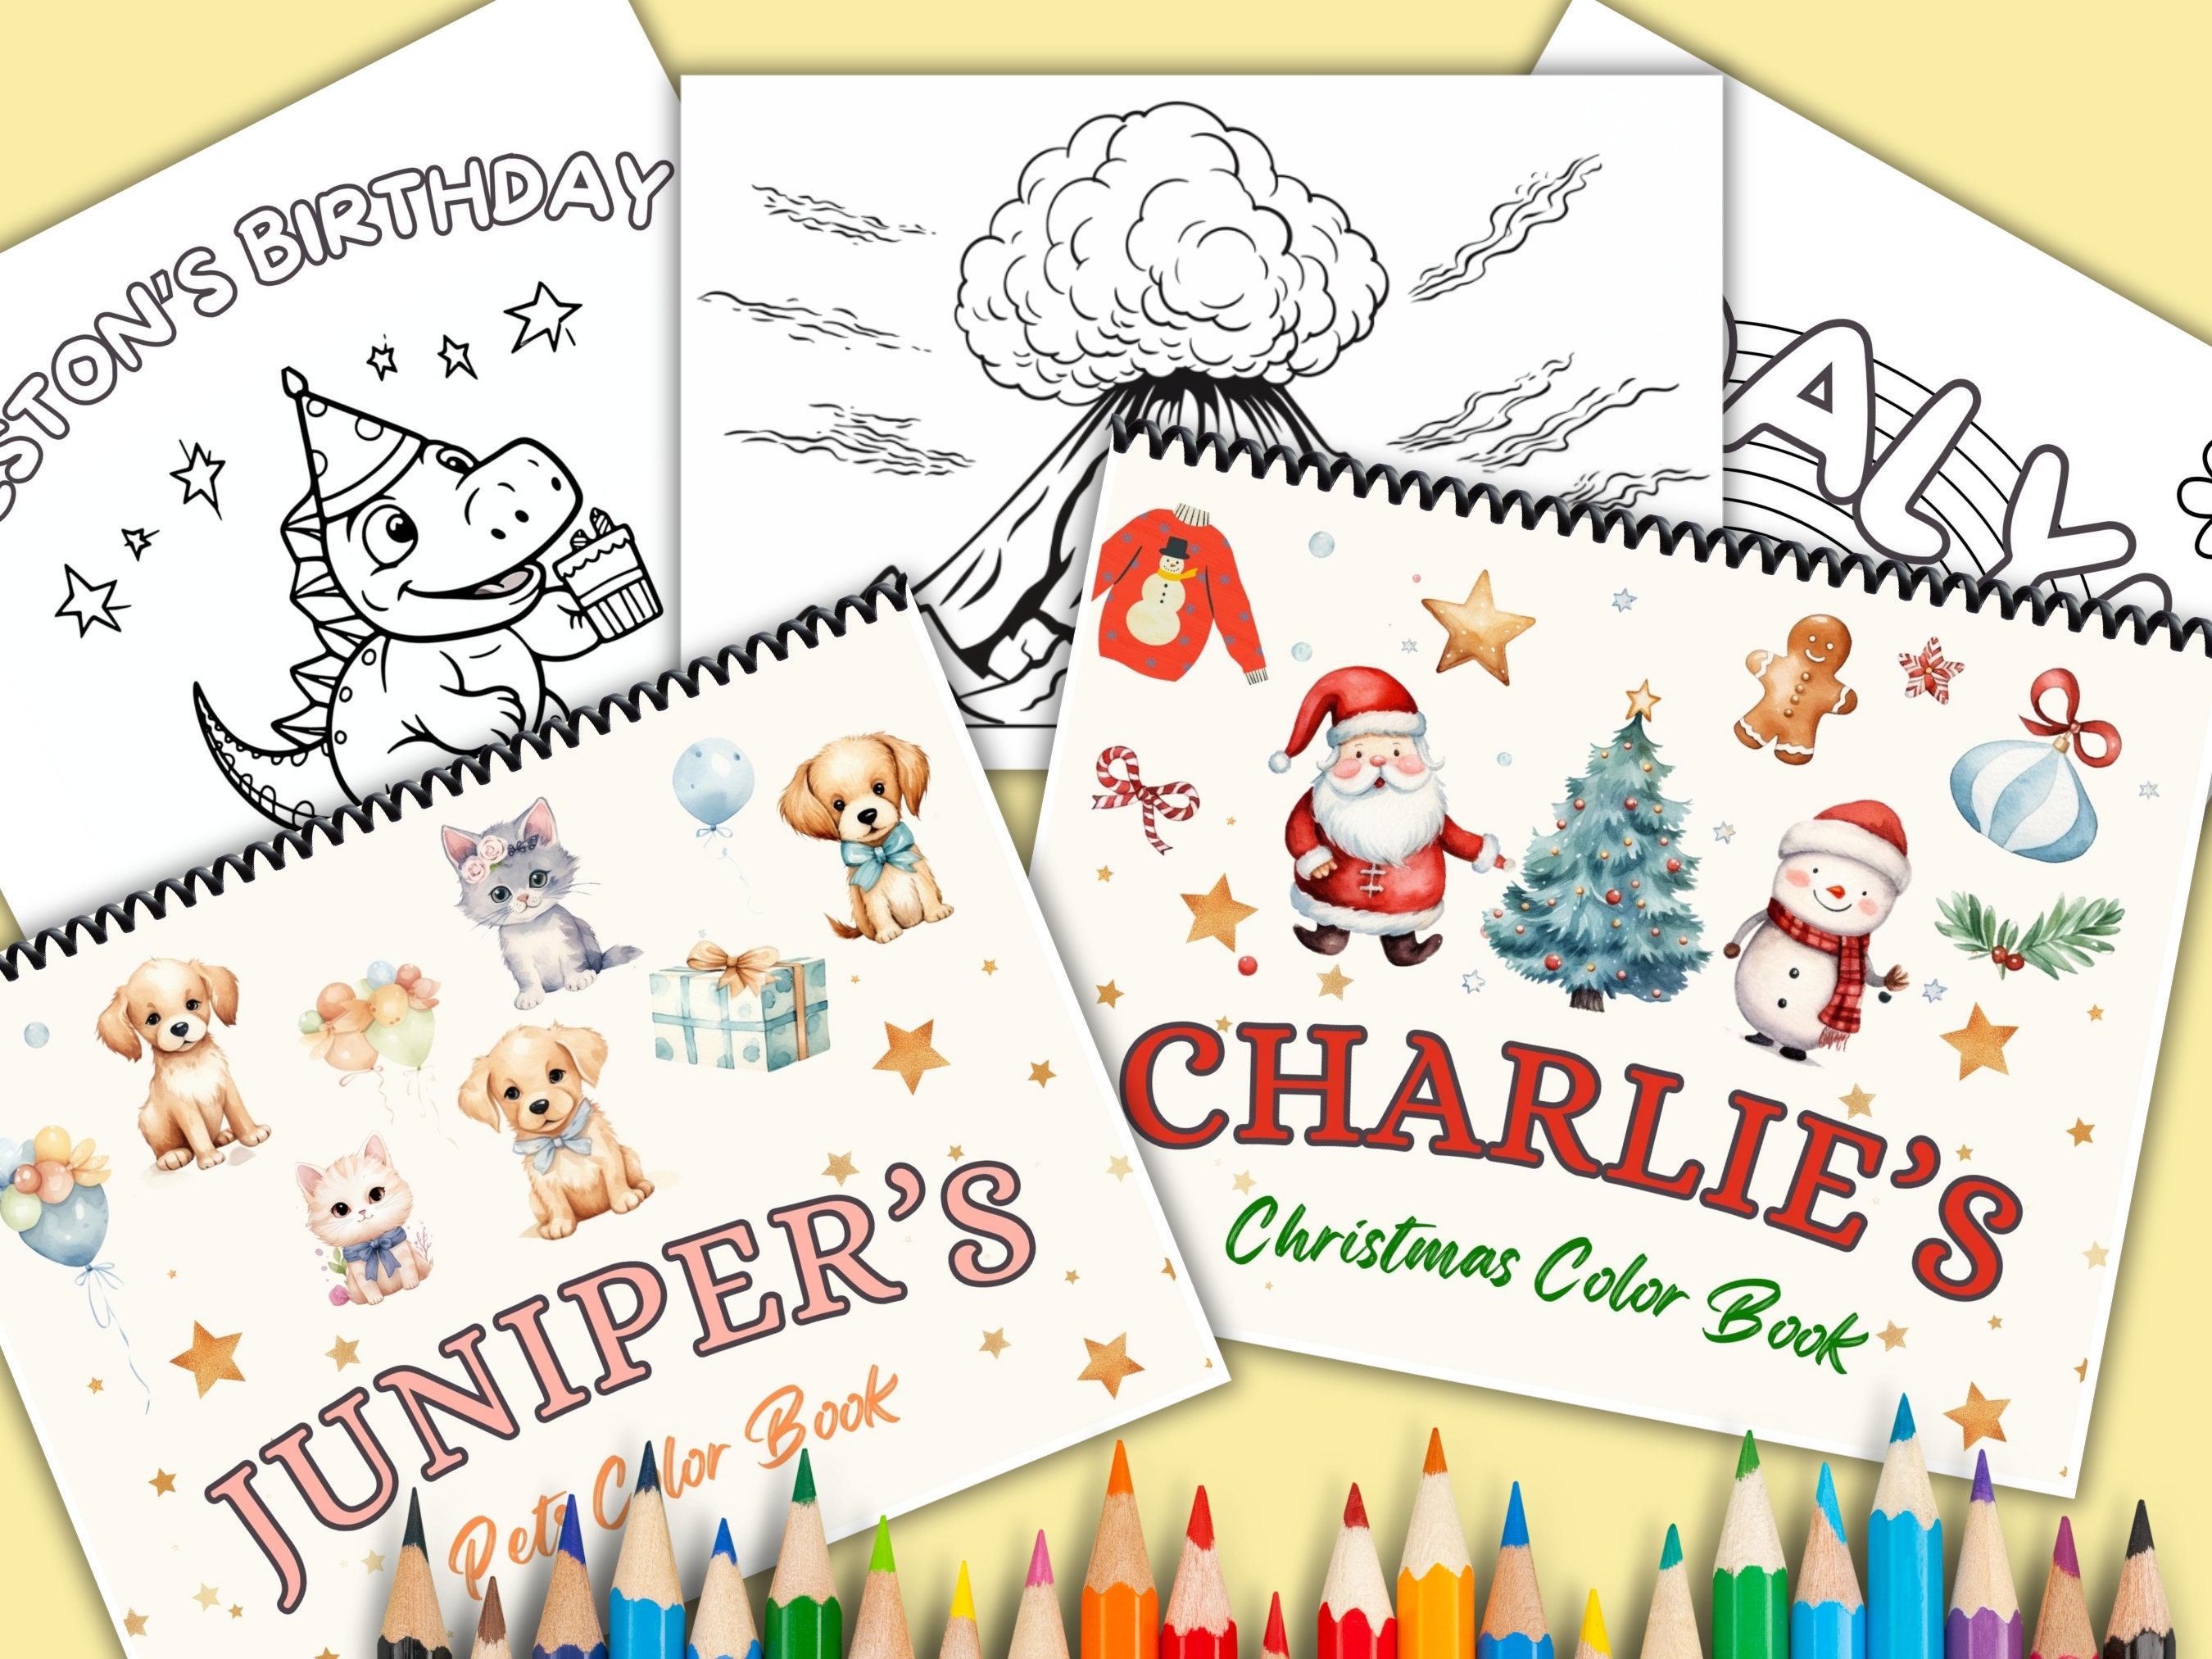 Custom Children's Color Book Full Size Large Coloring Book for